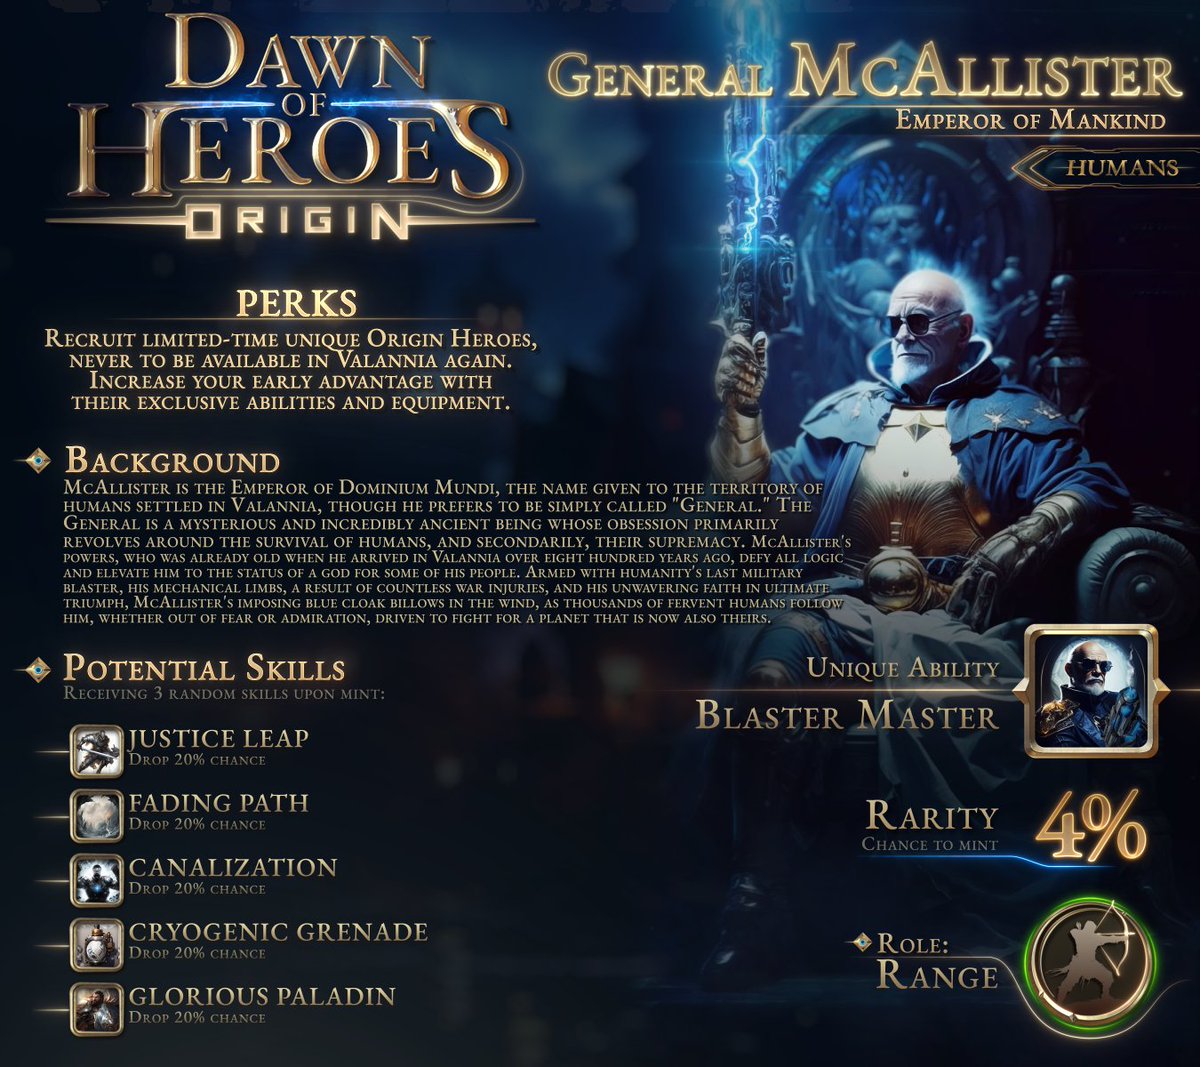 Dawn of Heroes - Origin | General McAllister

🔸 The Emperor of Dominium Mundi, is revered as a godlike figure by his people, leading them with an unwavering determination for human survival. 🌌

🔹 Rarity: 4%
🔹 Unique Ability: Blaster Master

➡️ Join the Whitelist now to